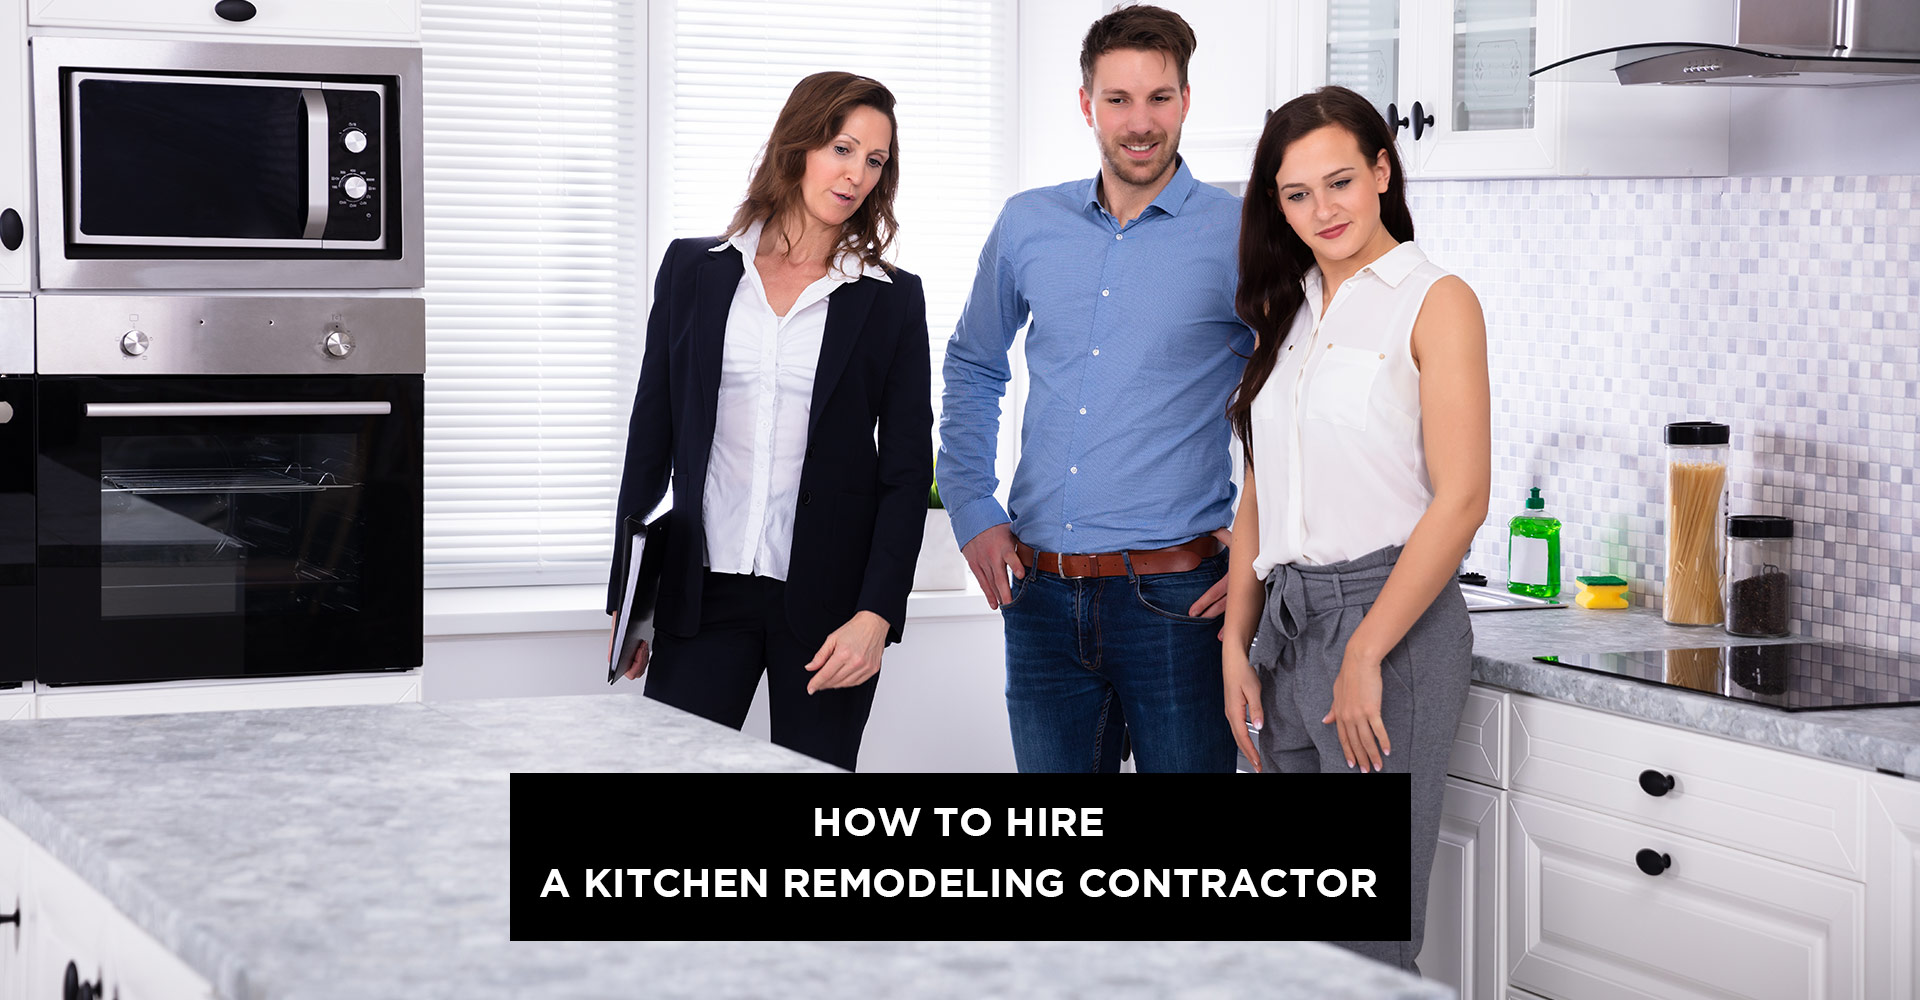 How to Hire a Kitchen Remodeling Contractor